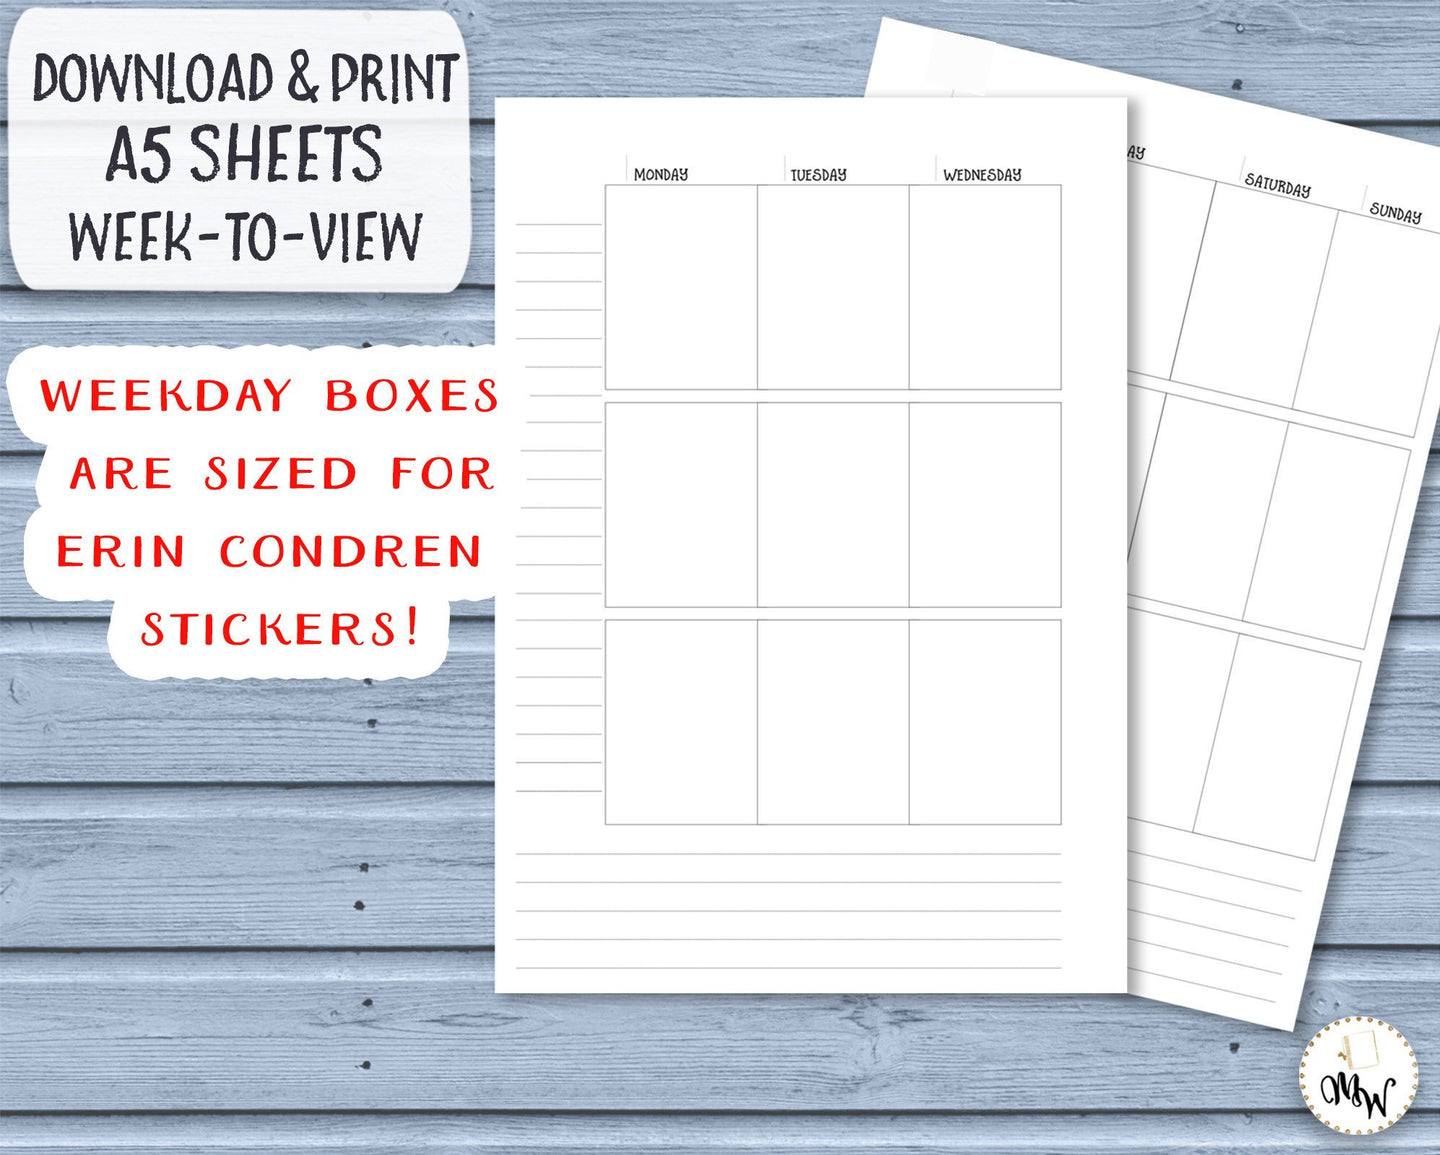 A5 Week to View Printable Insert, with Erin Condren Lifeplanner sized boxes.